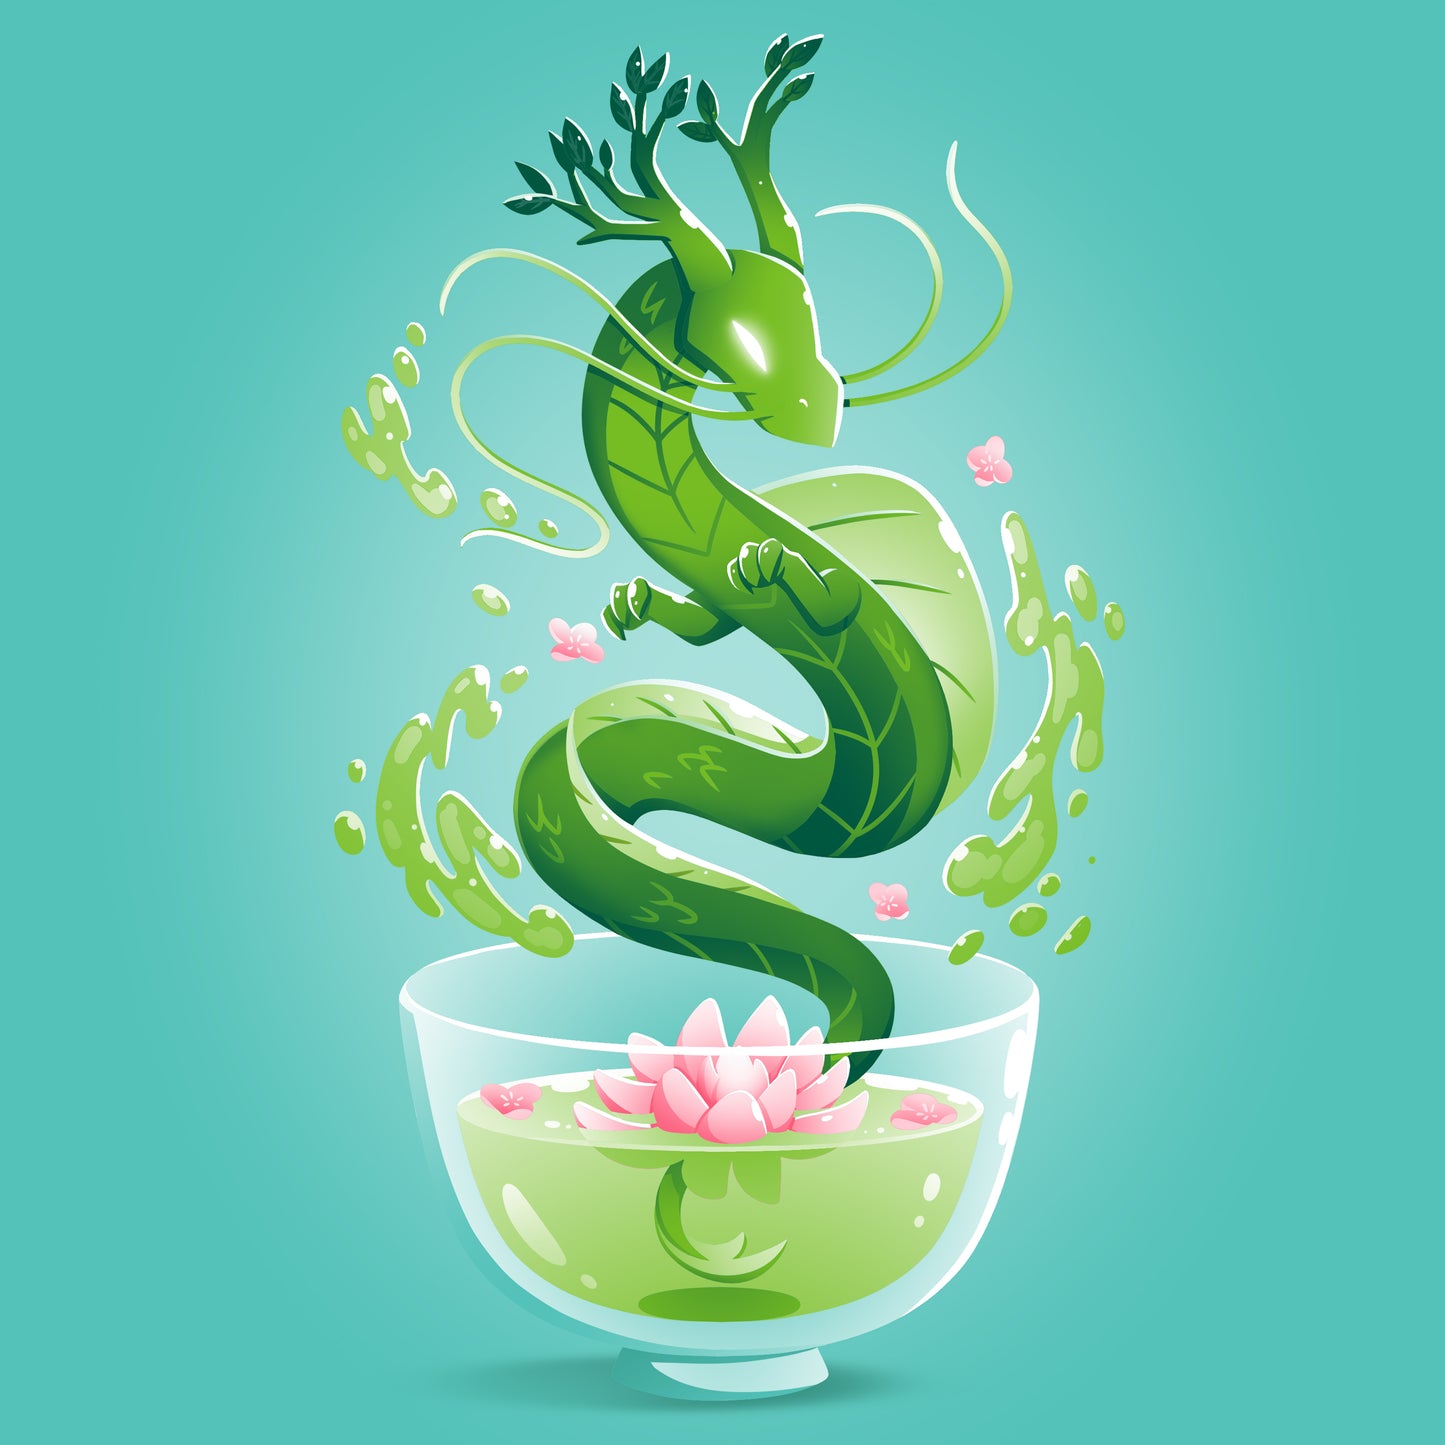 A Green Tea Dragon swims in a teacup full of flower blossoms, made by TeeTurtle.